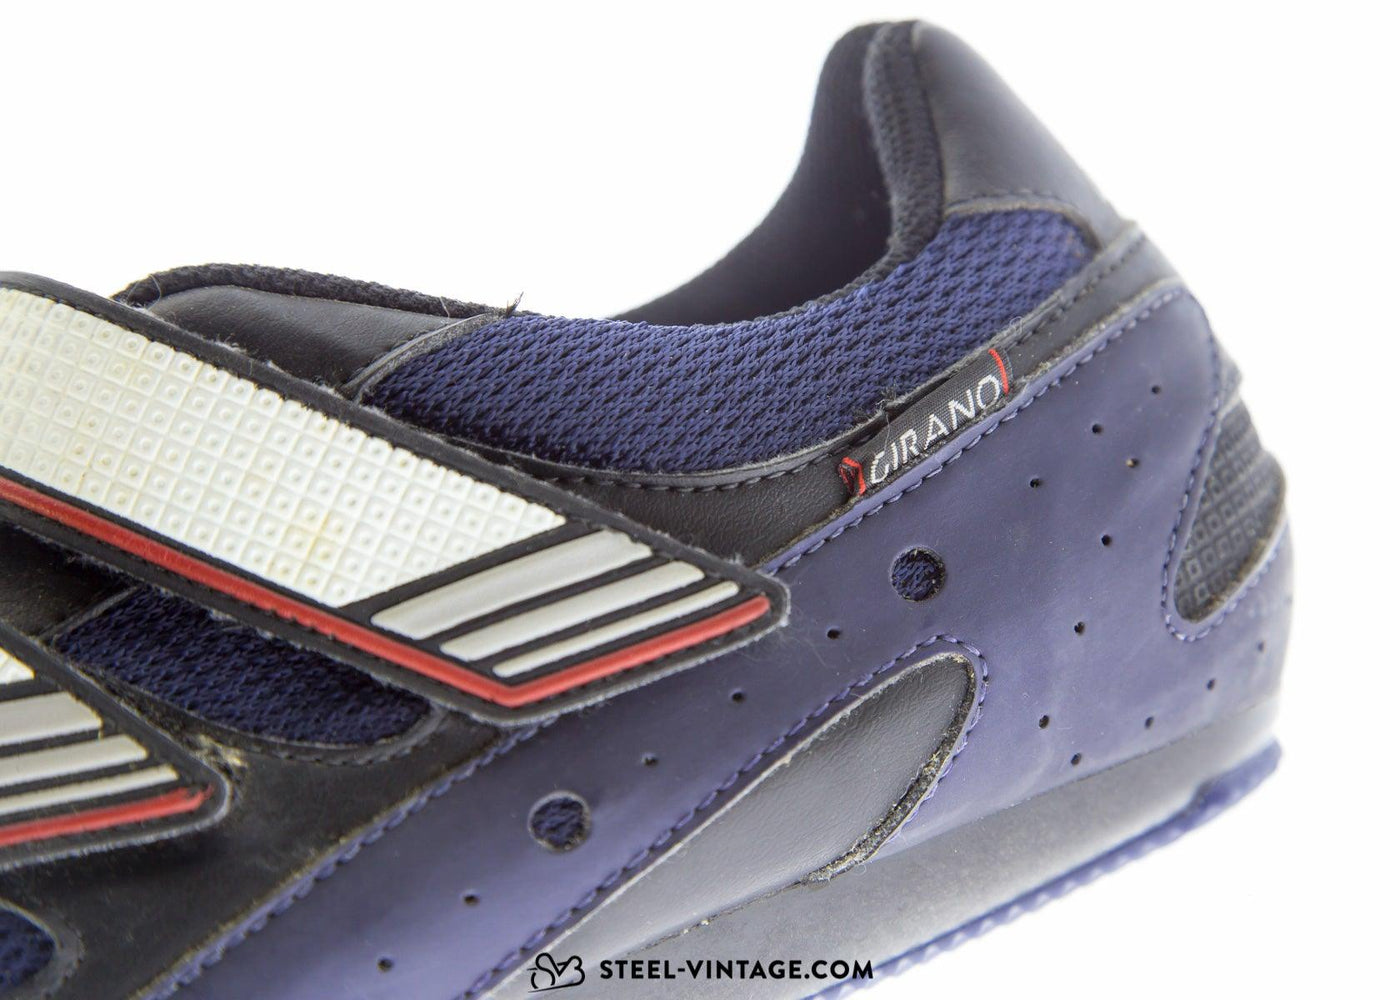 Adidas Girano Navy Blue Cycling Shoes NOS 45 1/3 - Steel Vintage Bikes